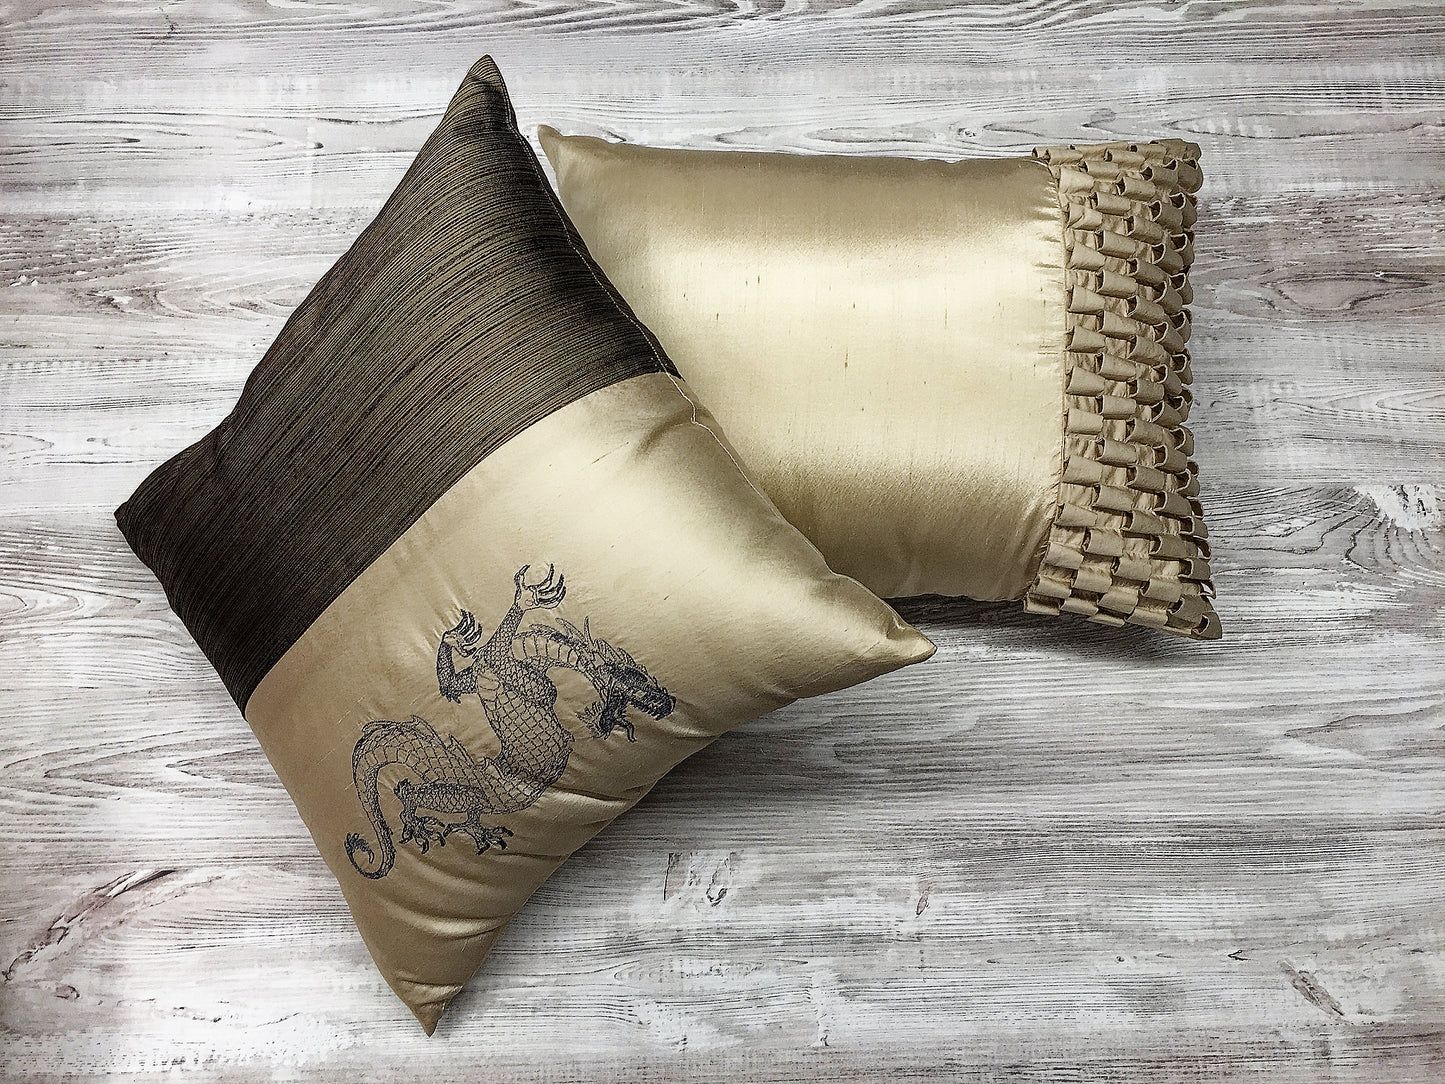 Luxury cushion collection "Dragon Year" Set of 2 cushions